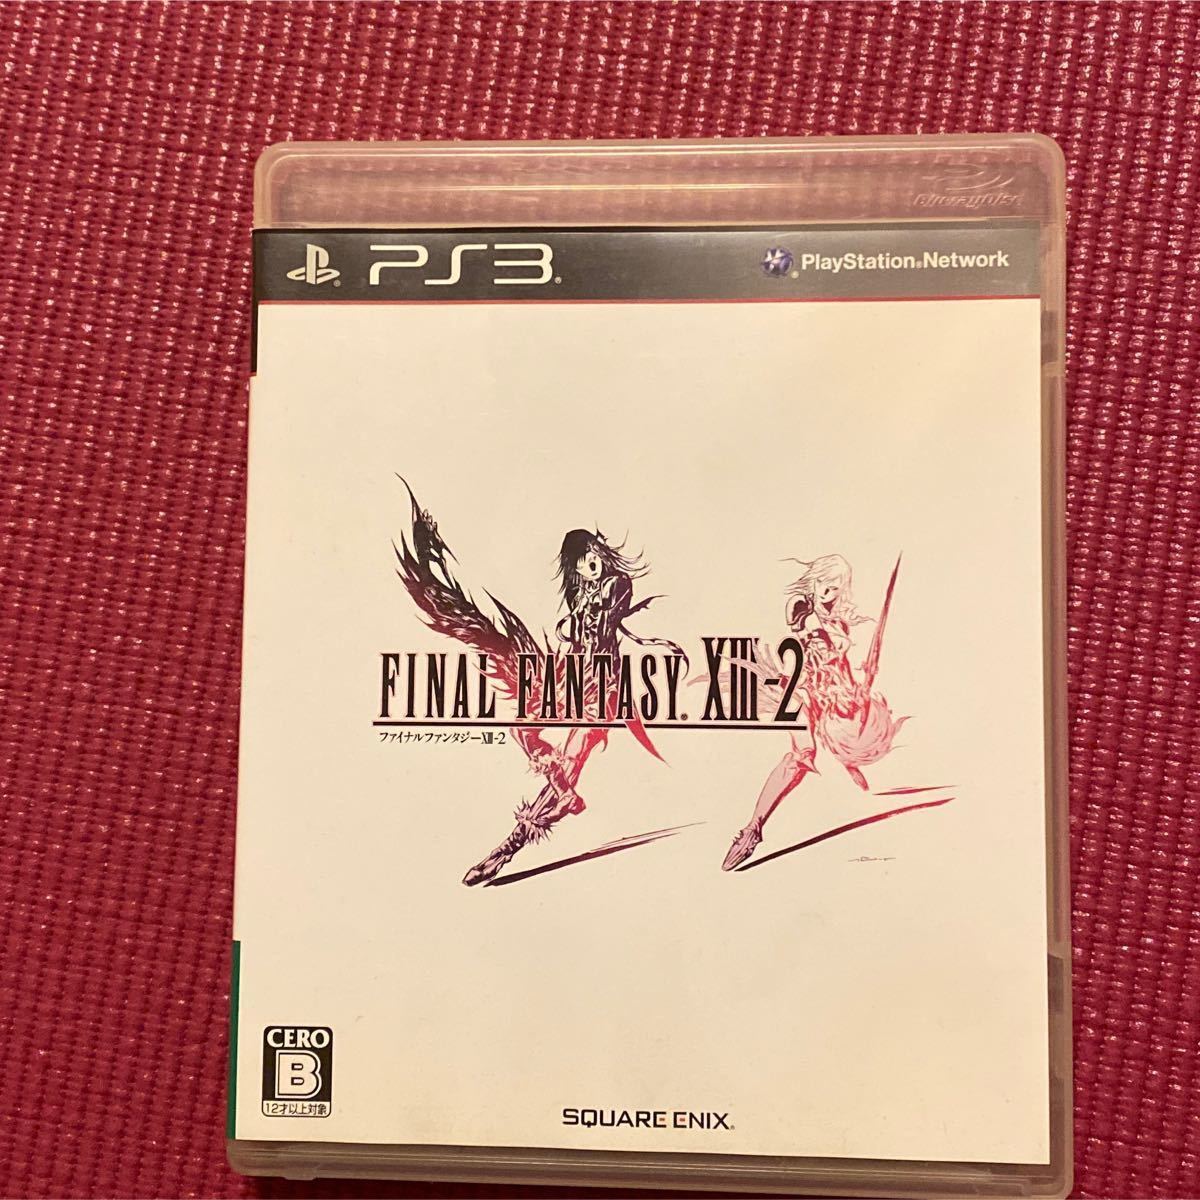 PS3 PS3ソフト ファイナルファンタジーXIII-2 